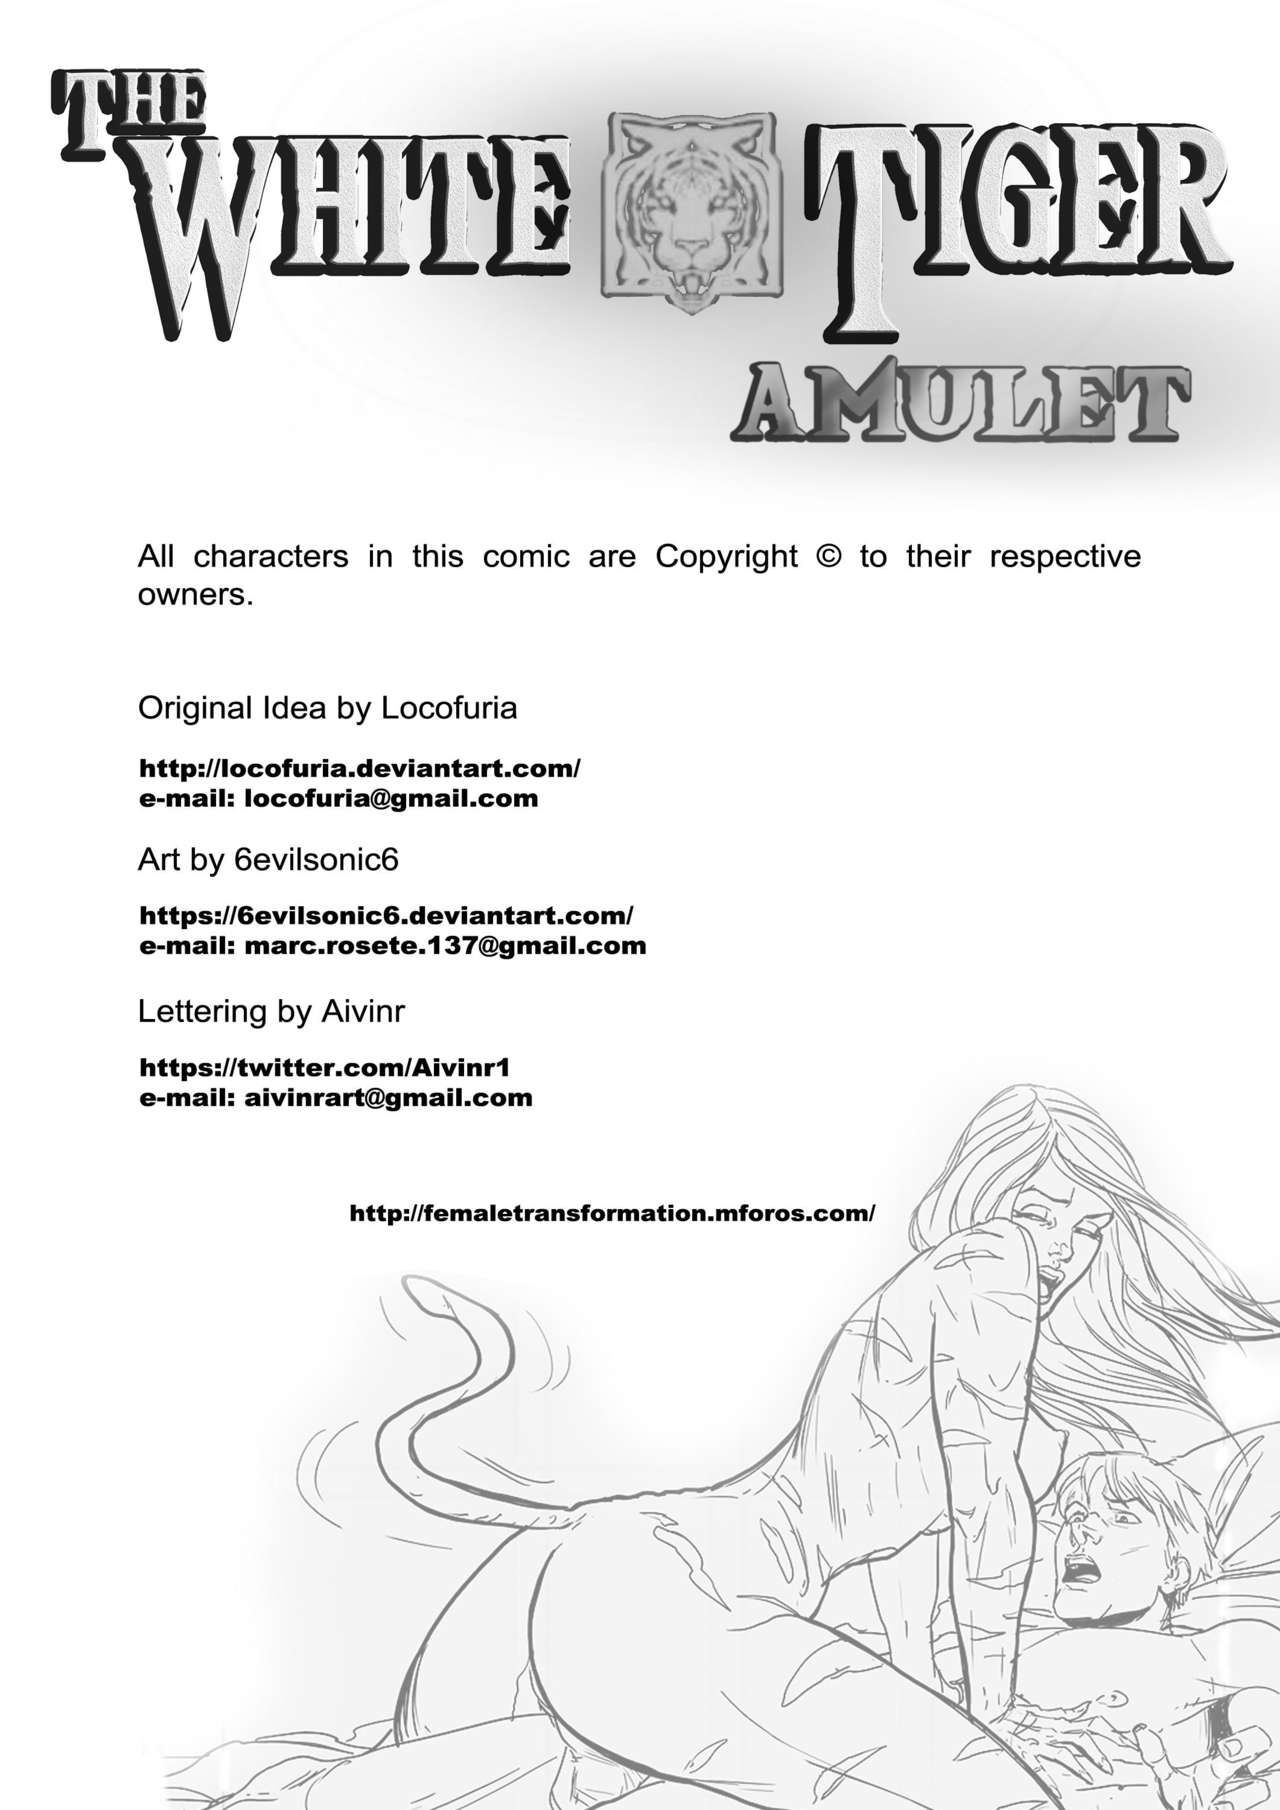 The White Tiger Amulet by Locofuria page 3